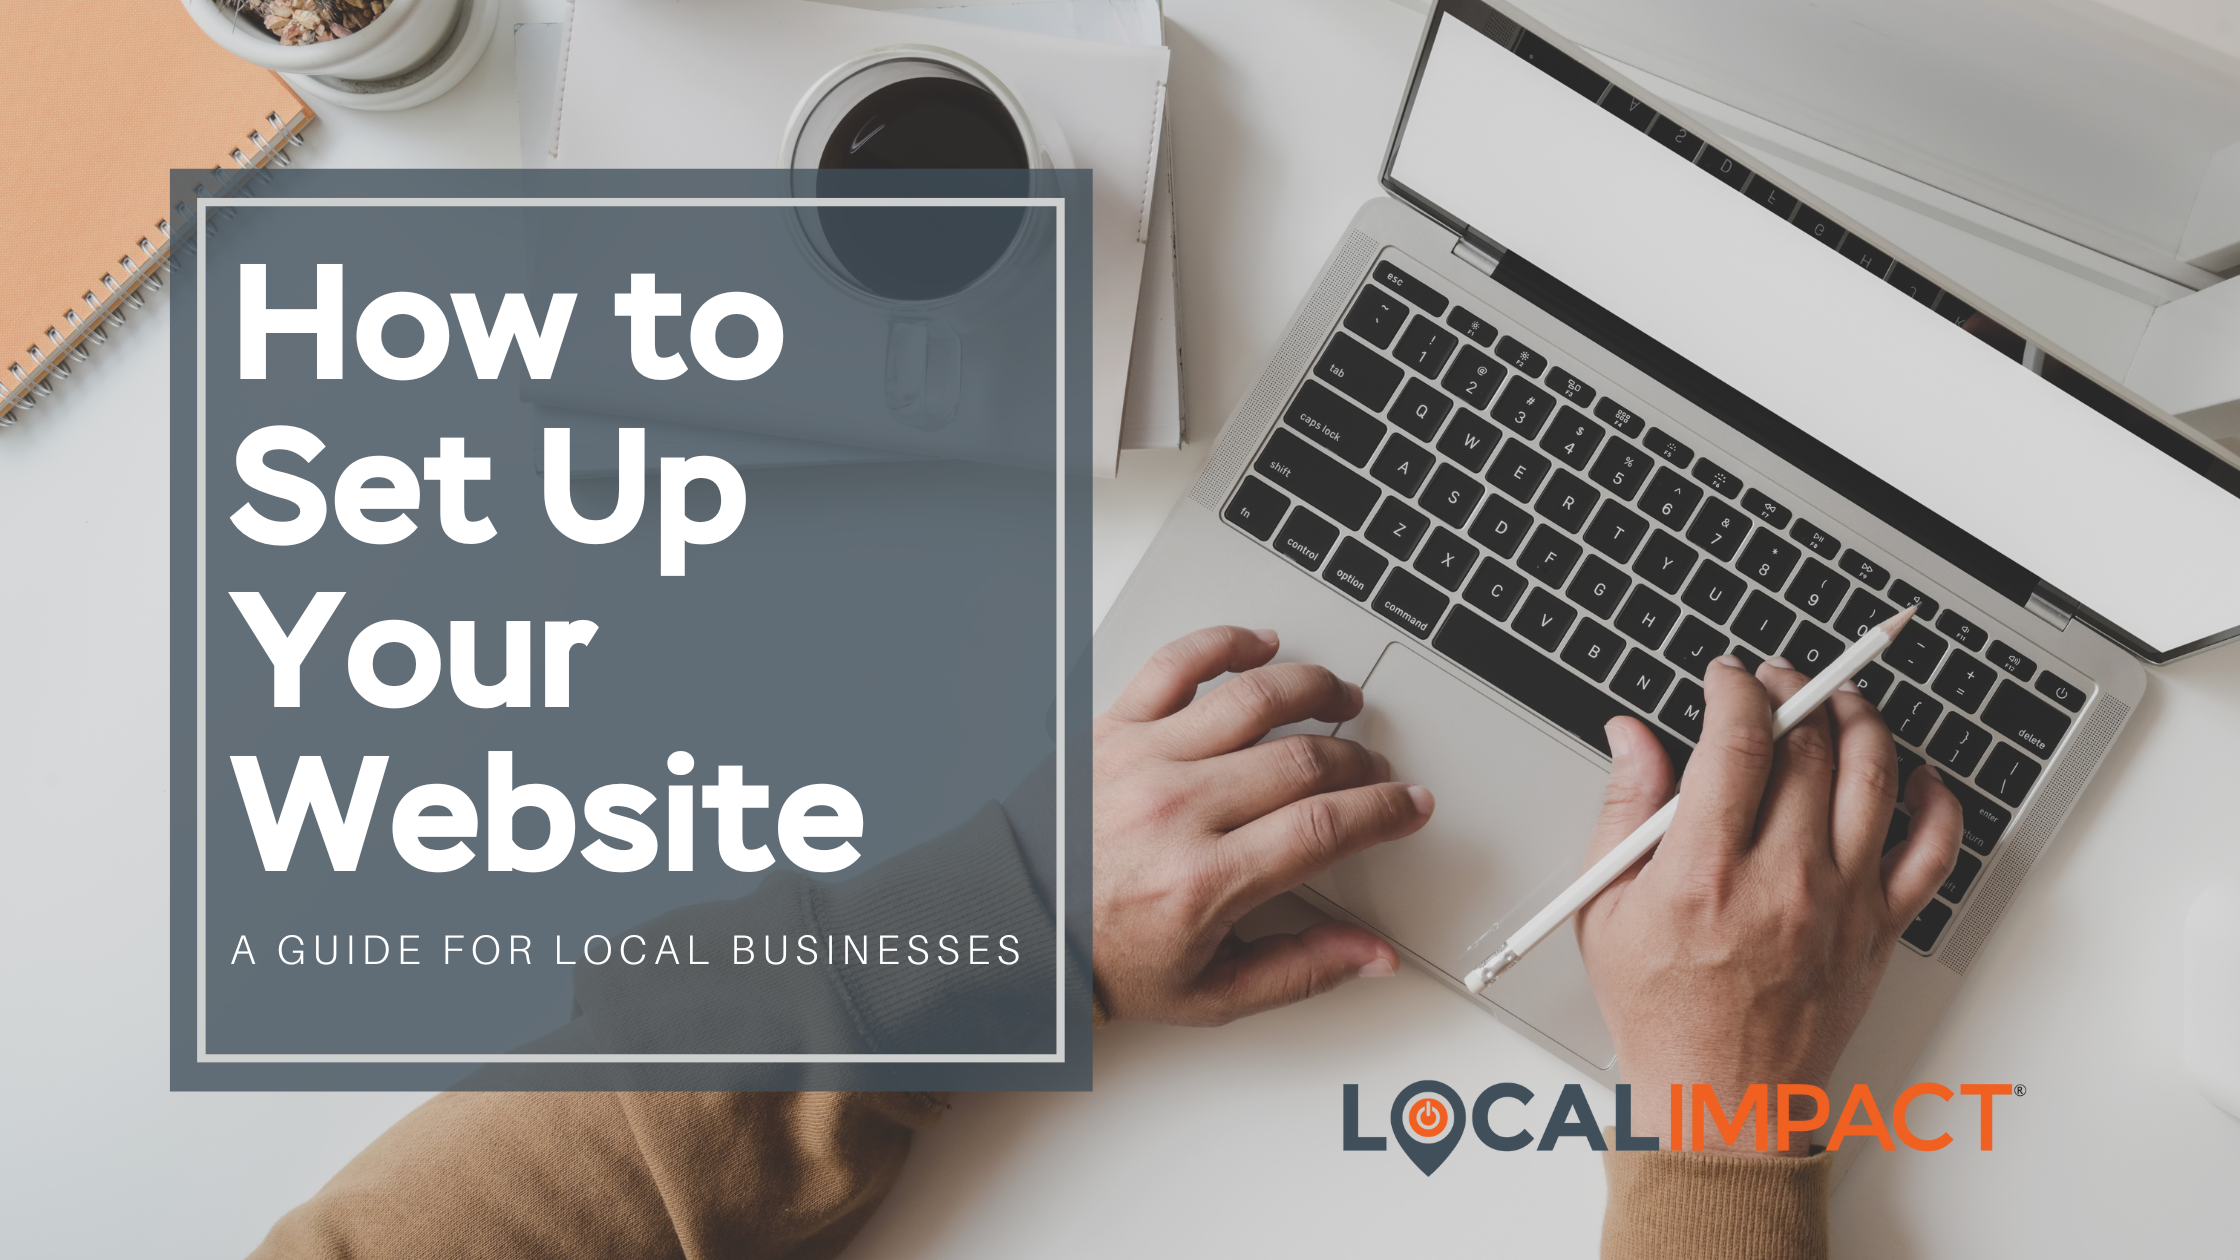 How to Set Up Your Website - A Guide for Local Businesses